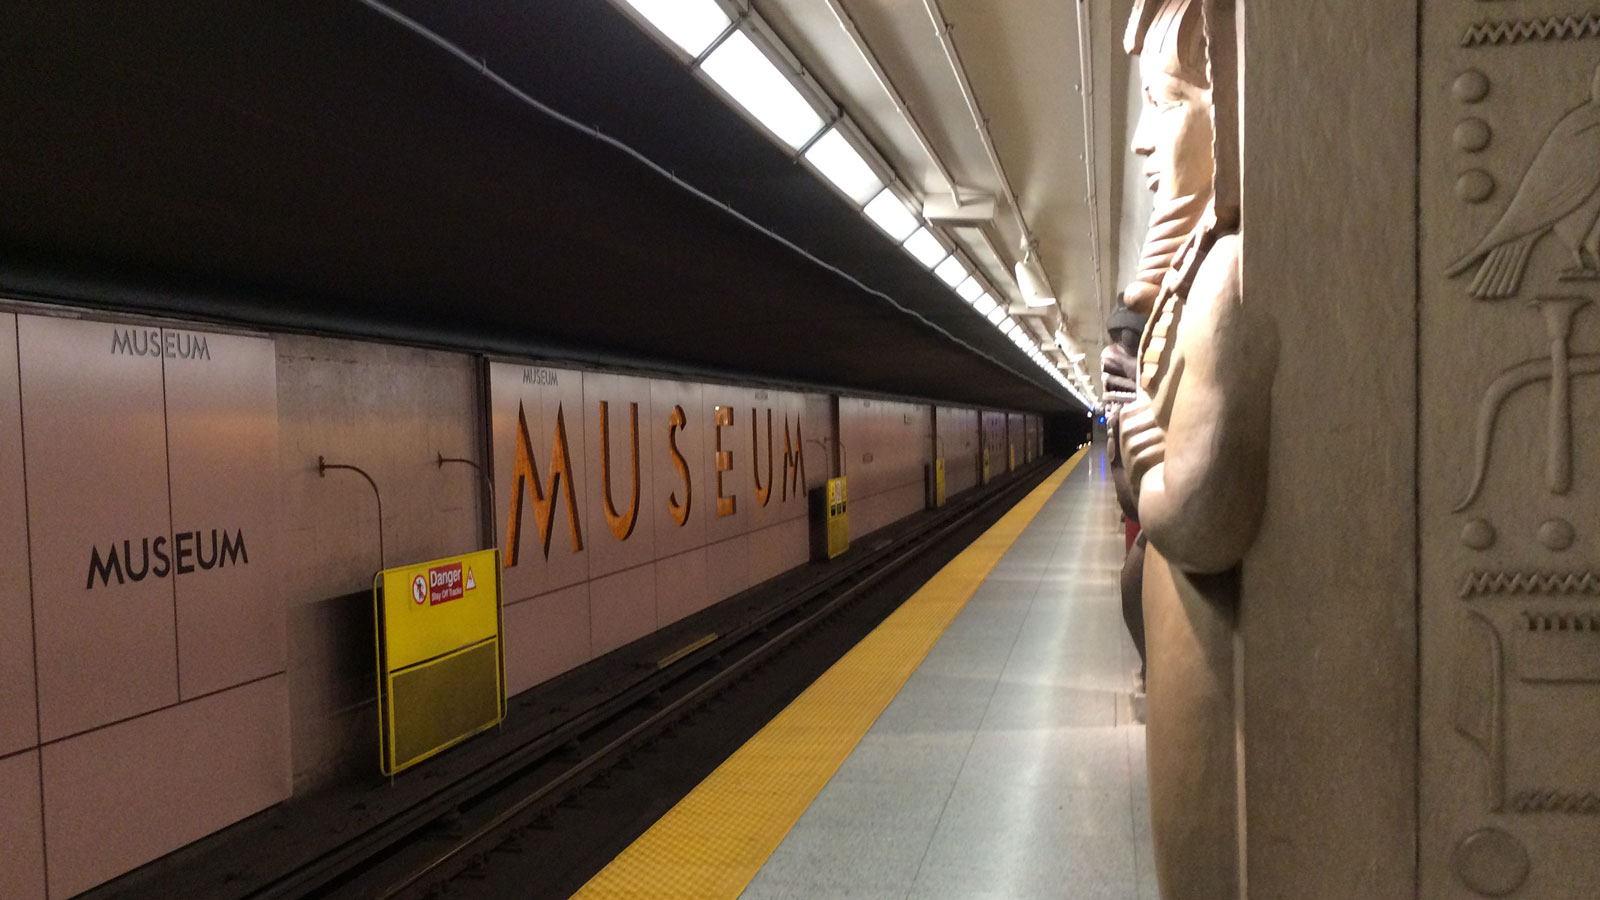 Photograph of the unique columns and pillars featured in the design of Museum Station in Toronto.